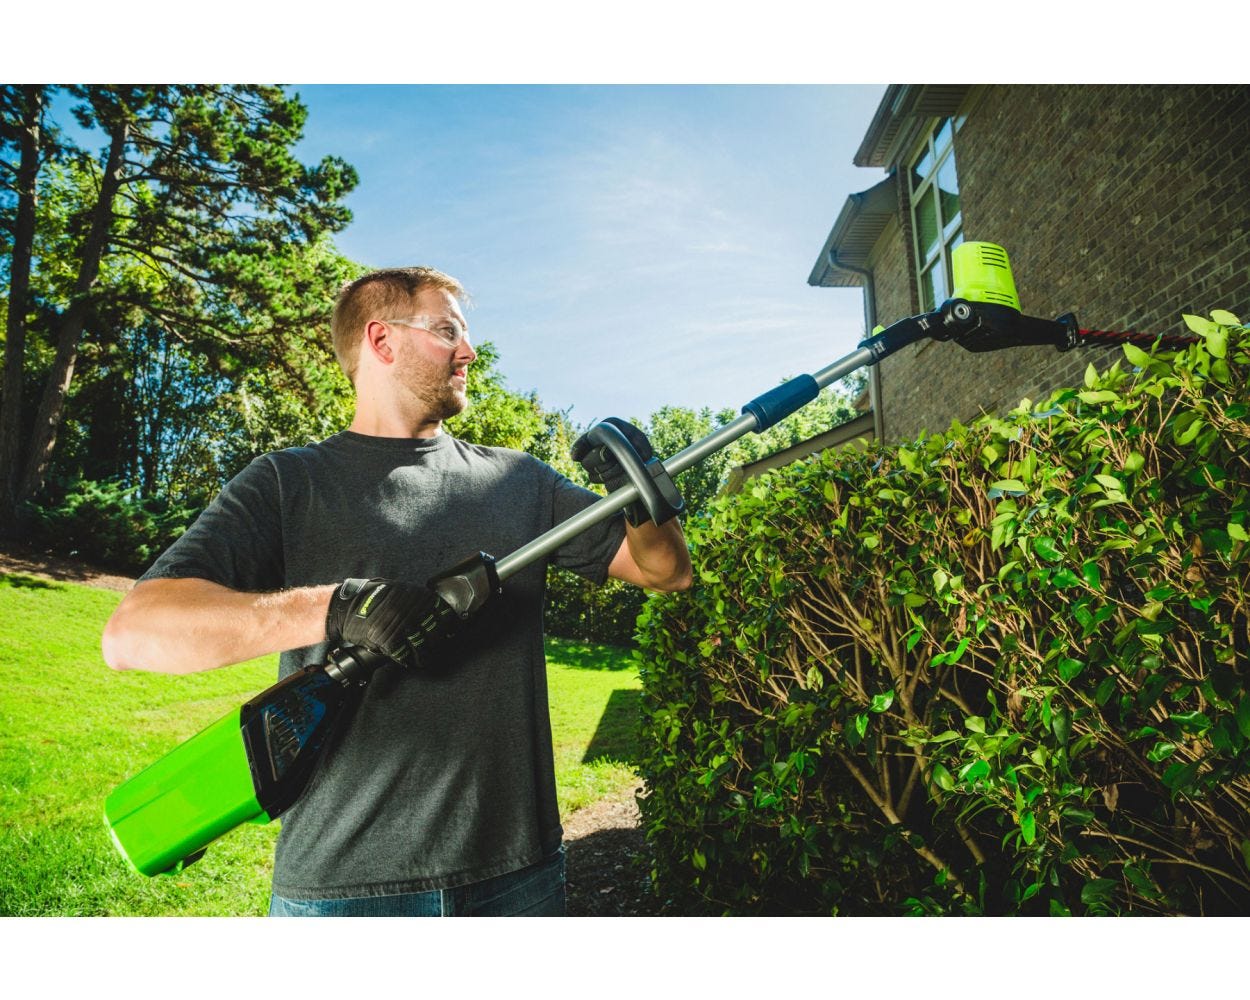 Pro 60V 20 inch Cordless Pole Hedge Trimmer with 2.0 Ah Battery